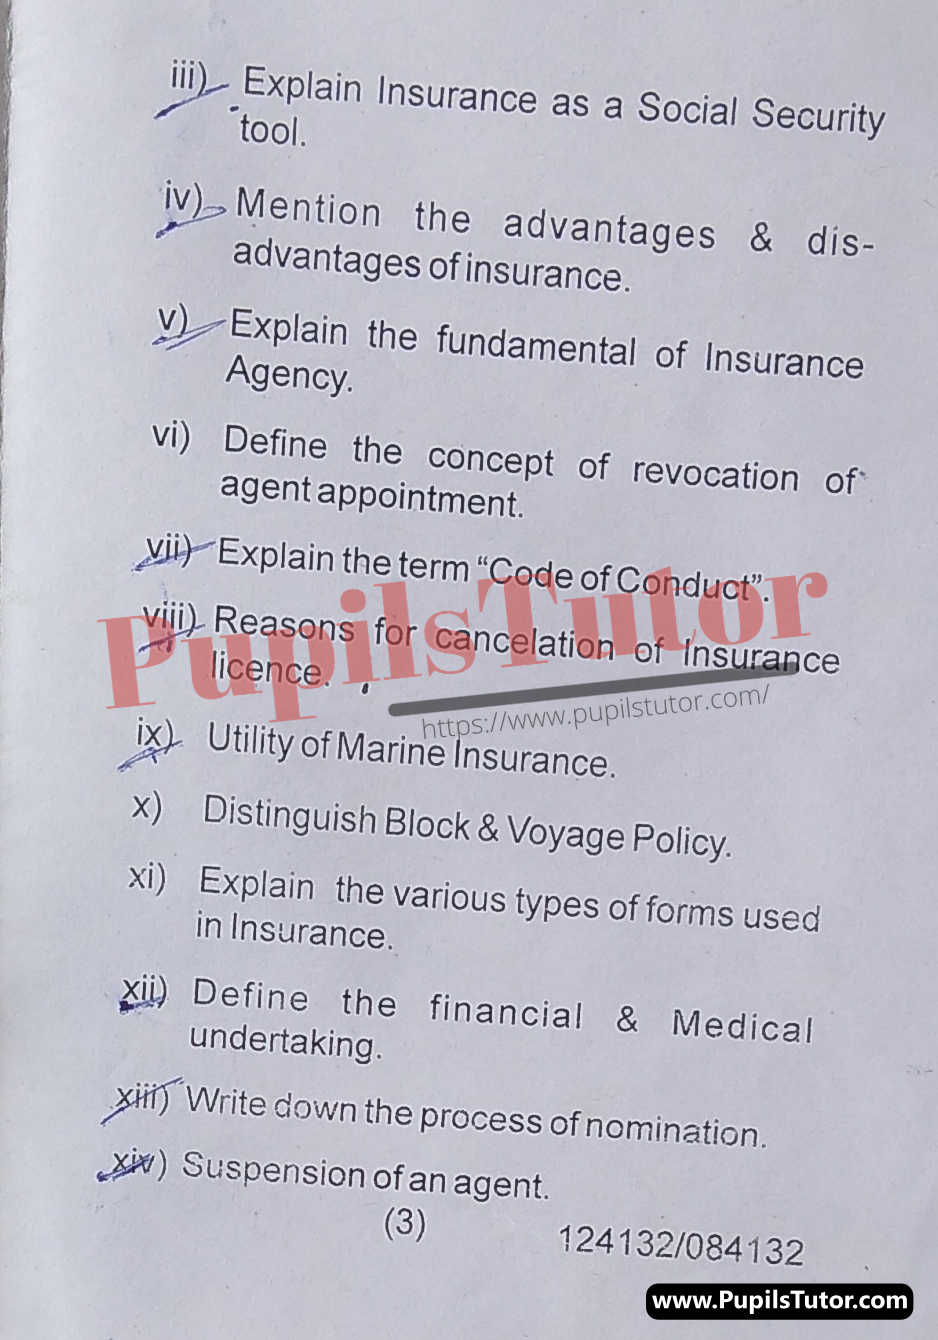 Free Download PDF Of Haryana State Board of Technical Education (HSBTE) FAA (Finance Accounts And Auditing) Third Semester Latest Question Paper For Fundamentals Of Insurance Subject (Page 3) - https://www.pupilstutor.com